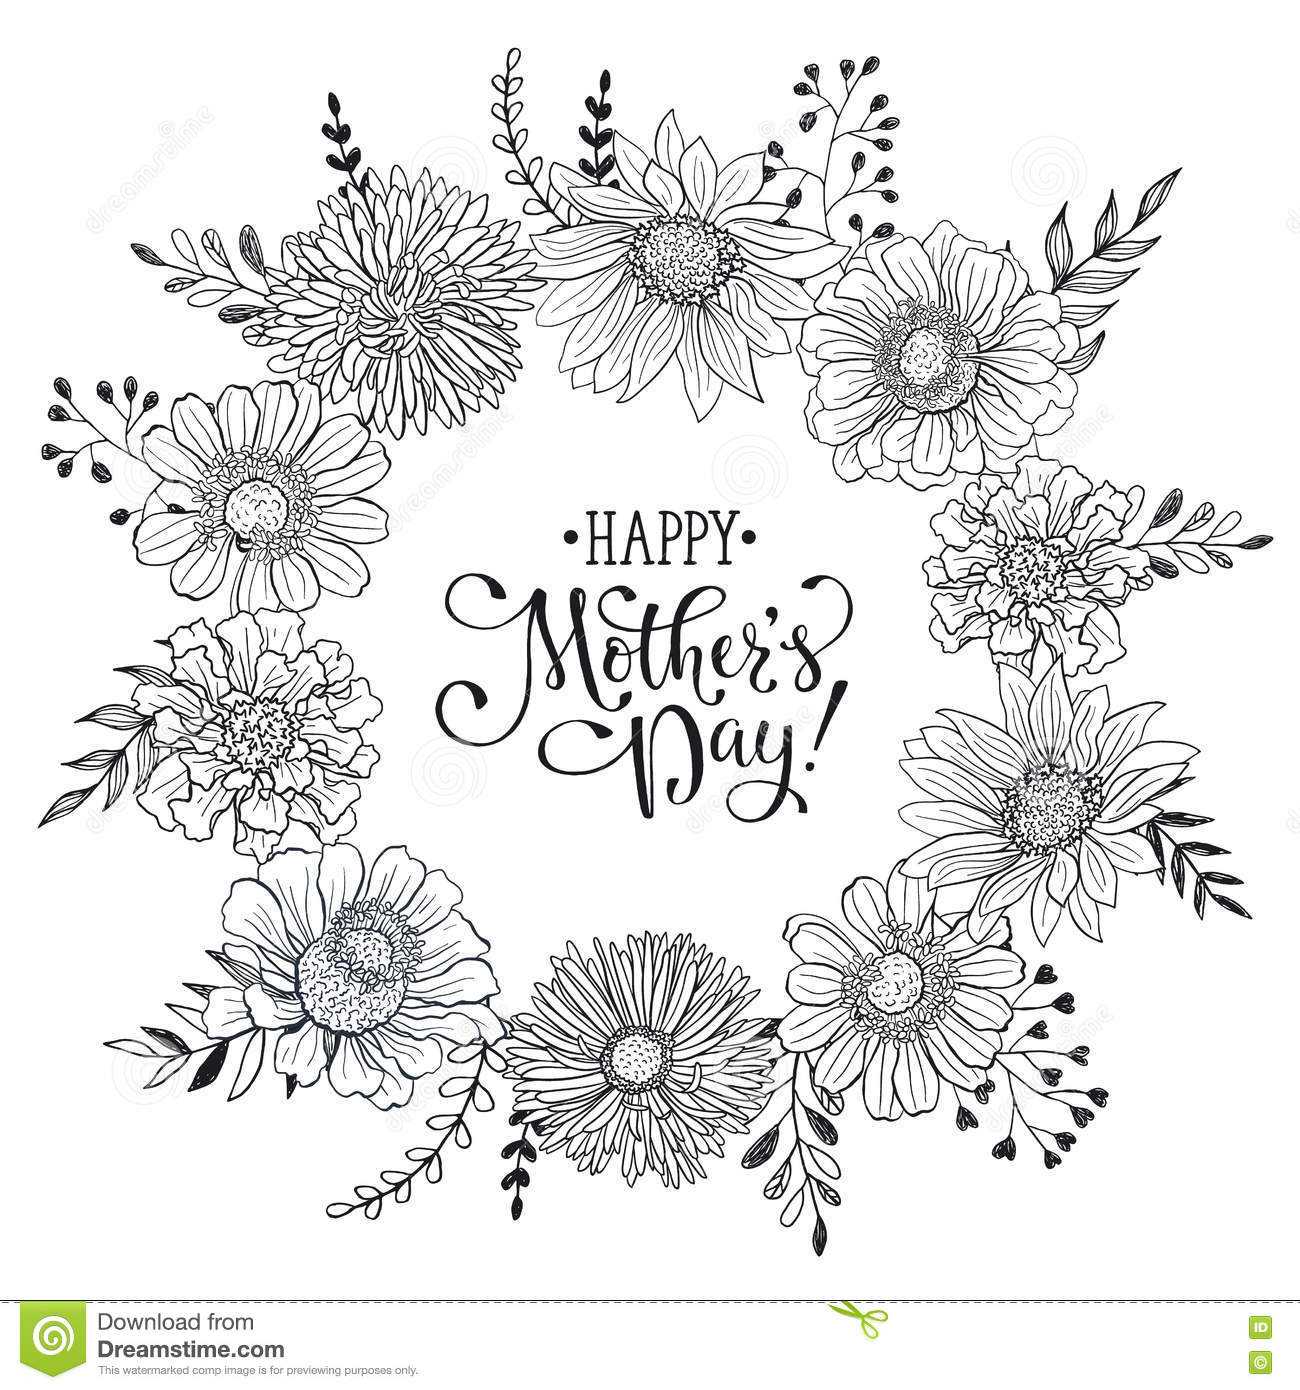 Mother's Day Card Stock Vector. Illustration Of Monochrome With Mothers Day Card Templates